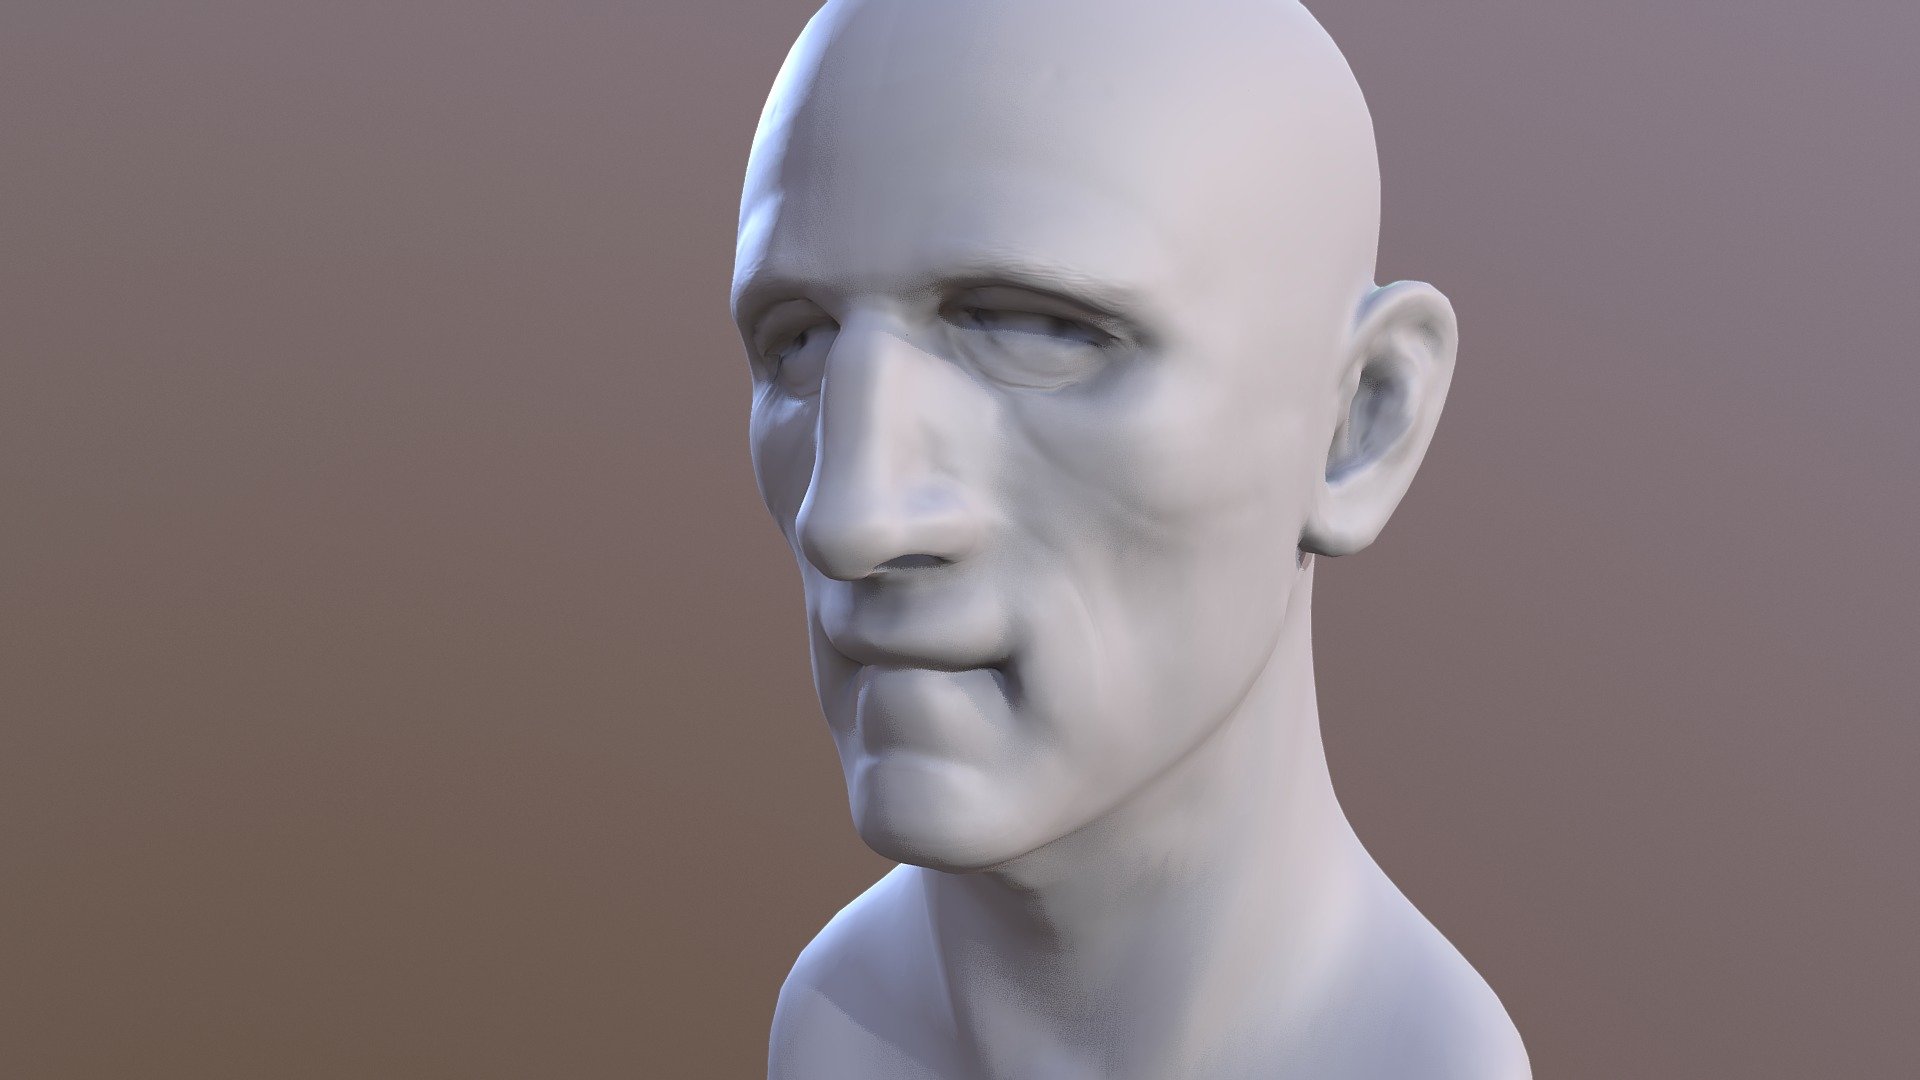 Some sculpt and map testing with ZBrush

Sculpted over zbro's Bust Base Mesh #2: http://luckilytip.blogspot.com.es/ - Head - 3D model by Juan (@juane3d) 3d model